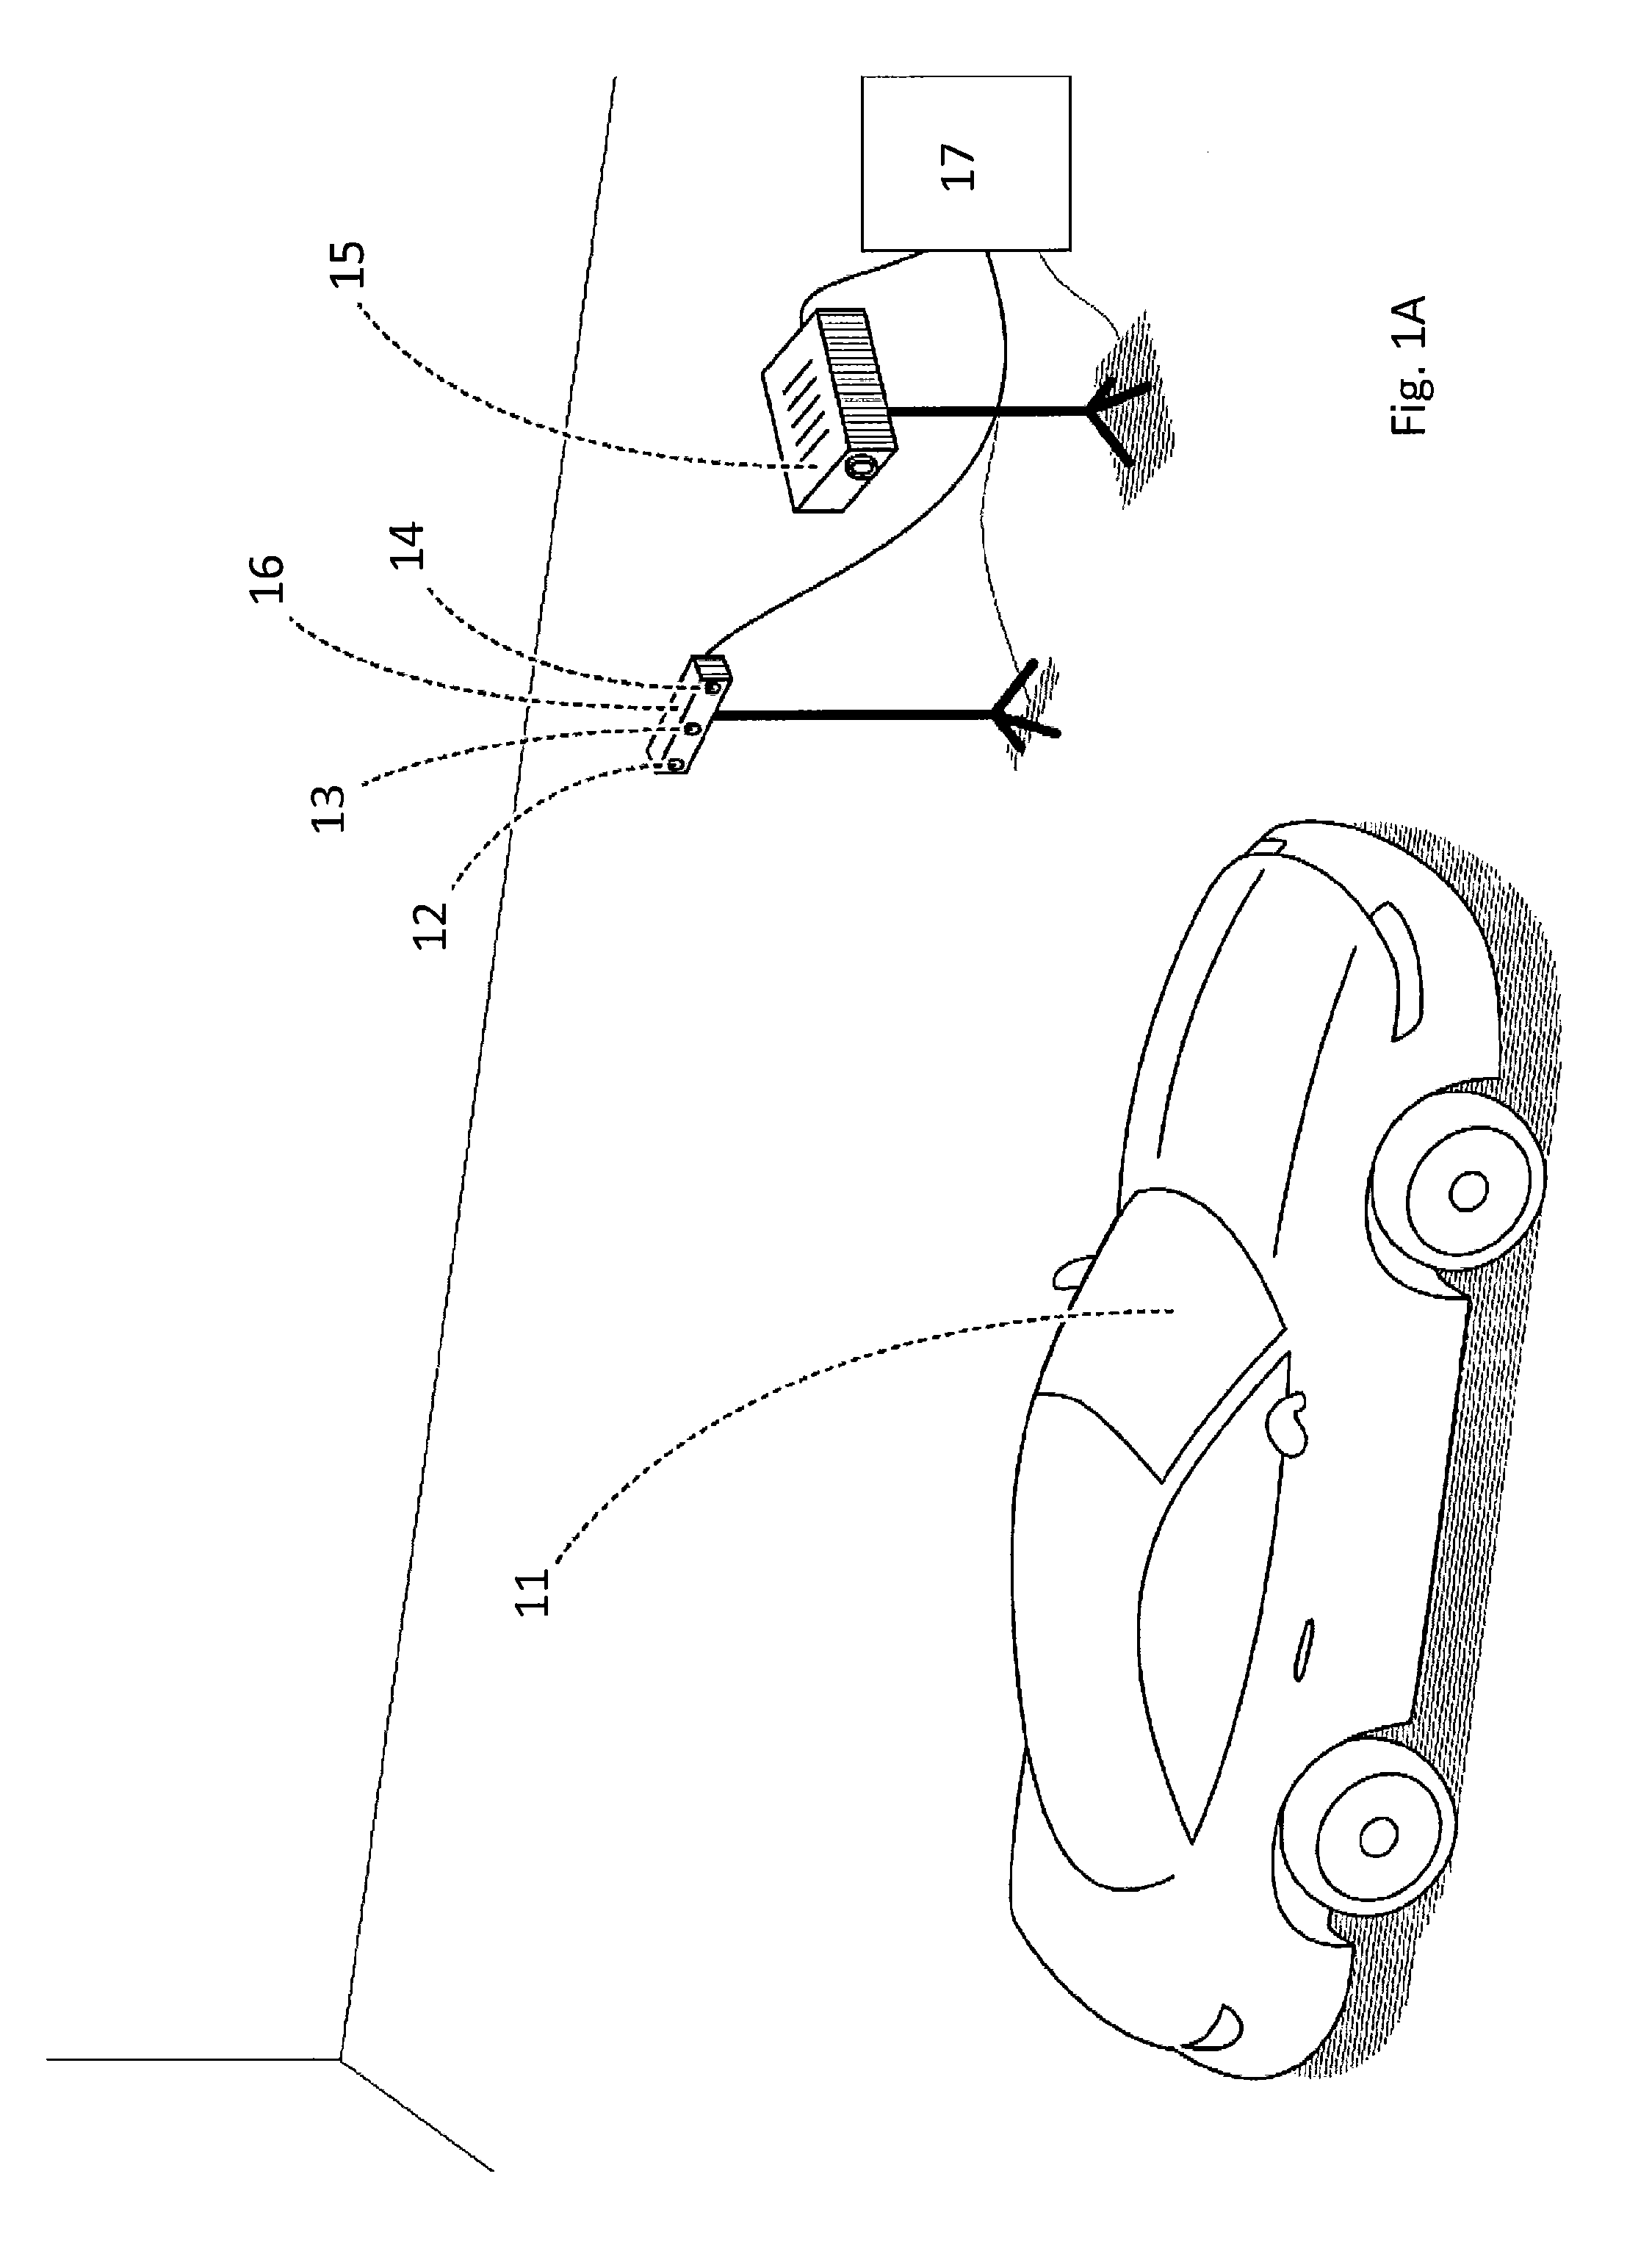 Method of and system for projecting digital information on a real object in a real environment